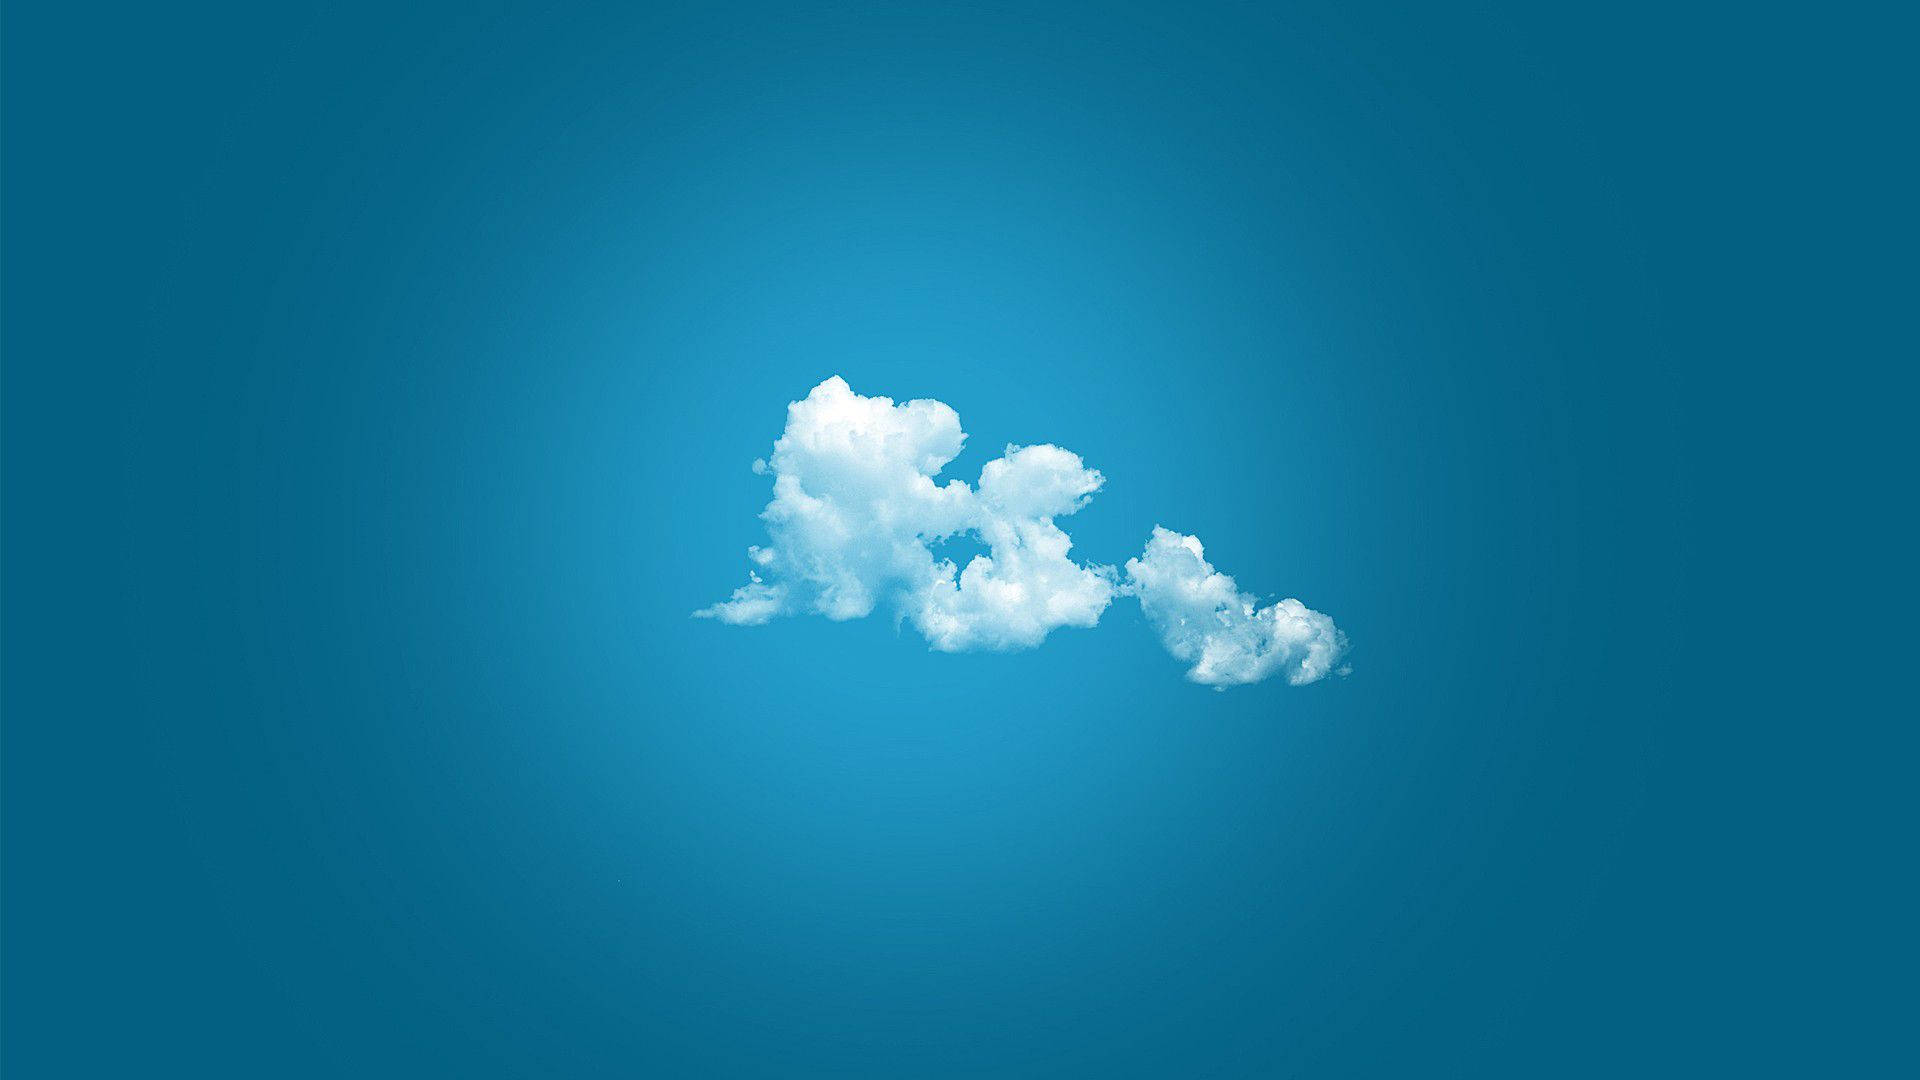 Simple Clouds in a Perfect Blue Sky Wallpaper